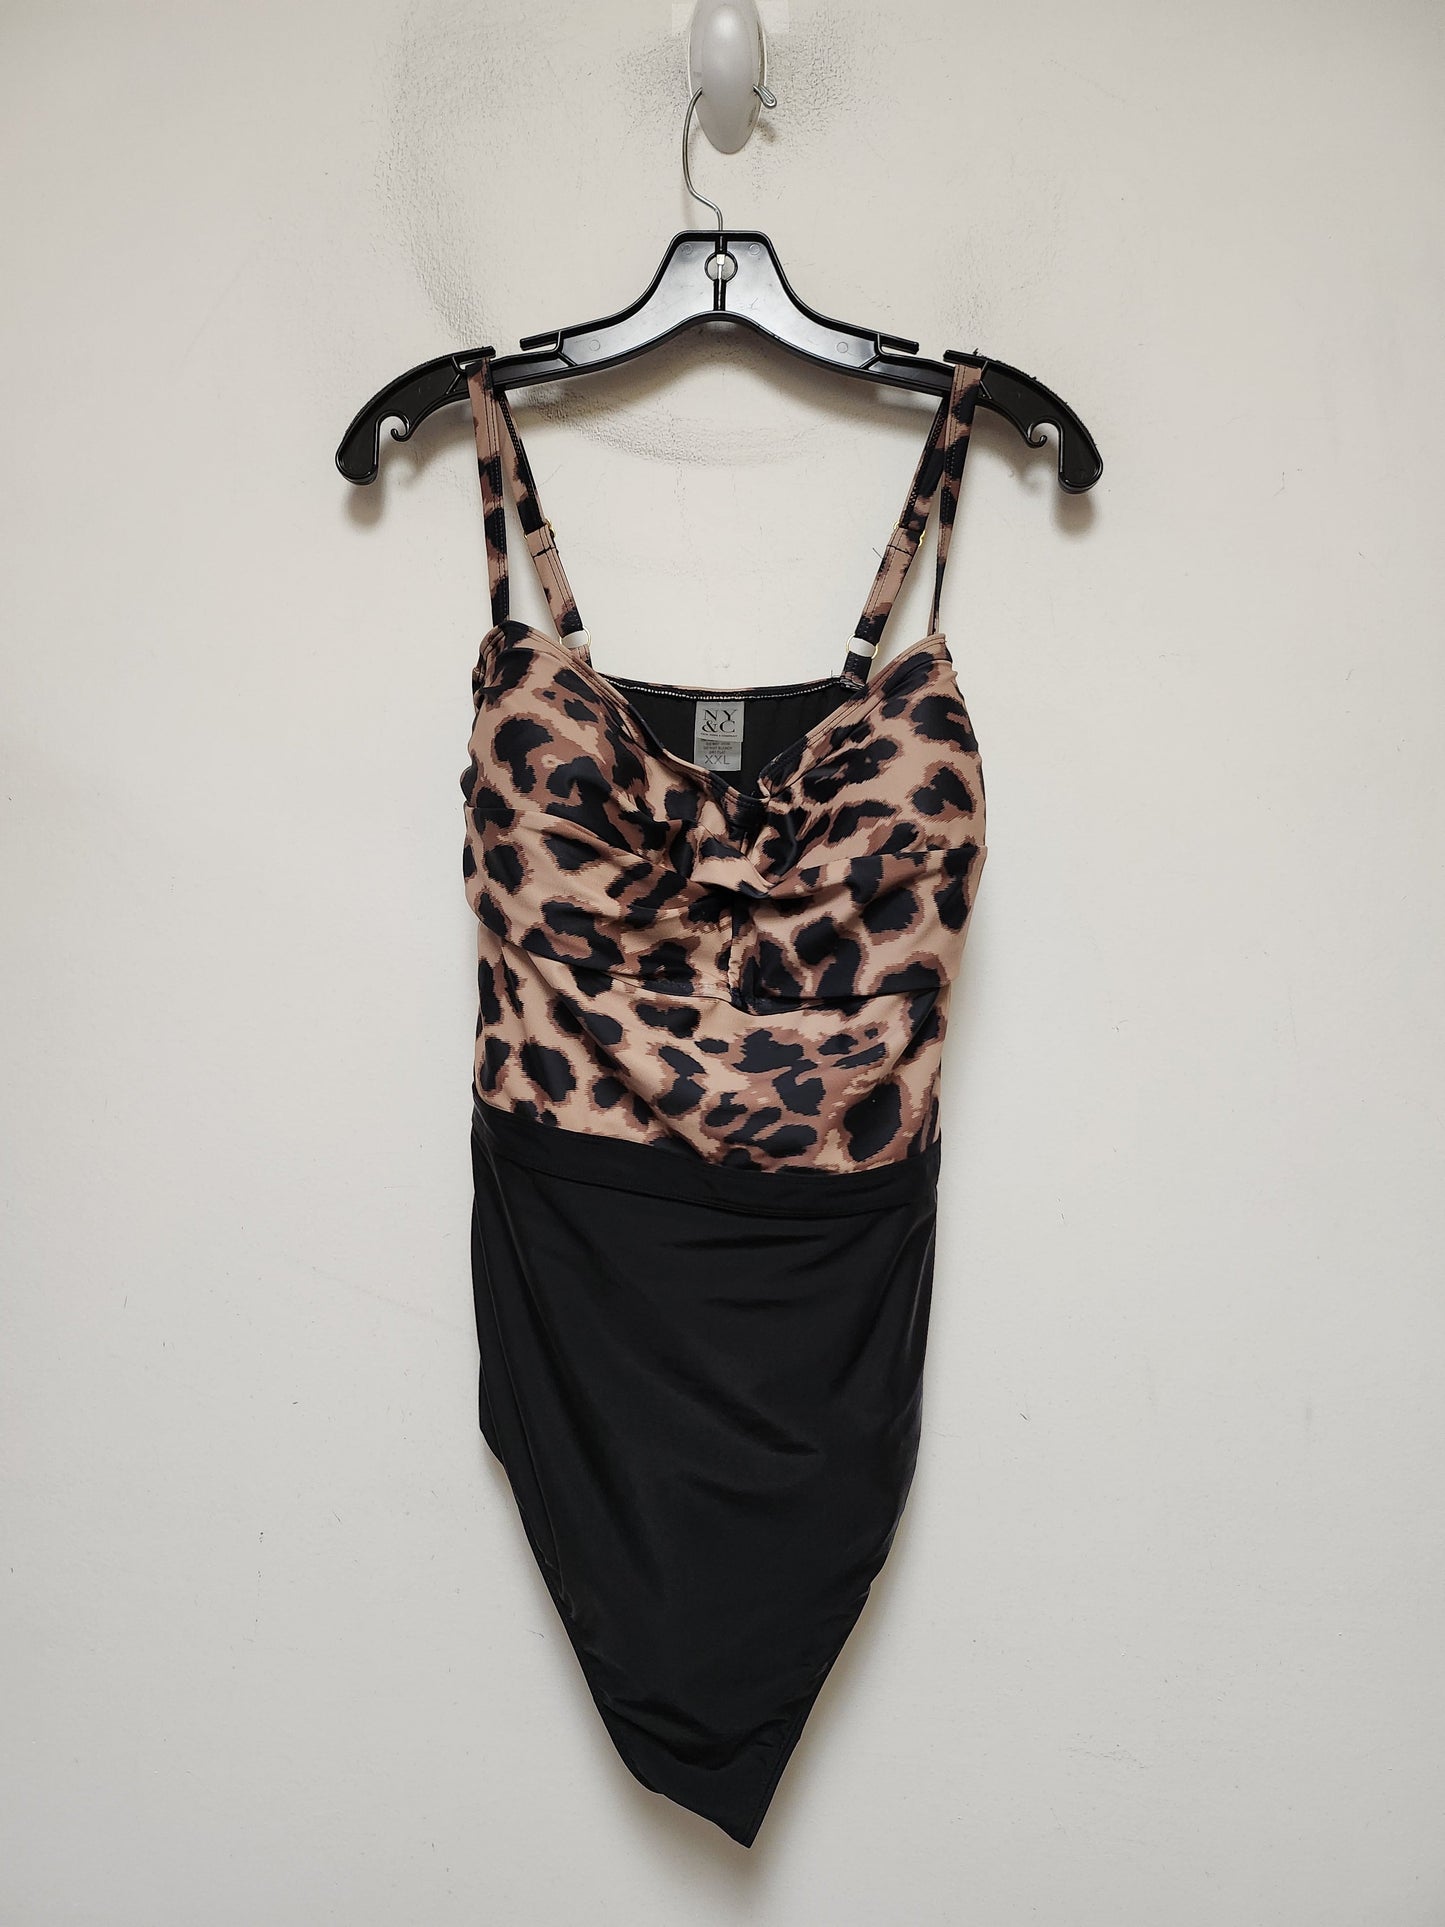 Animal Print Swimsuit New York And Co, Size 2x